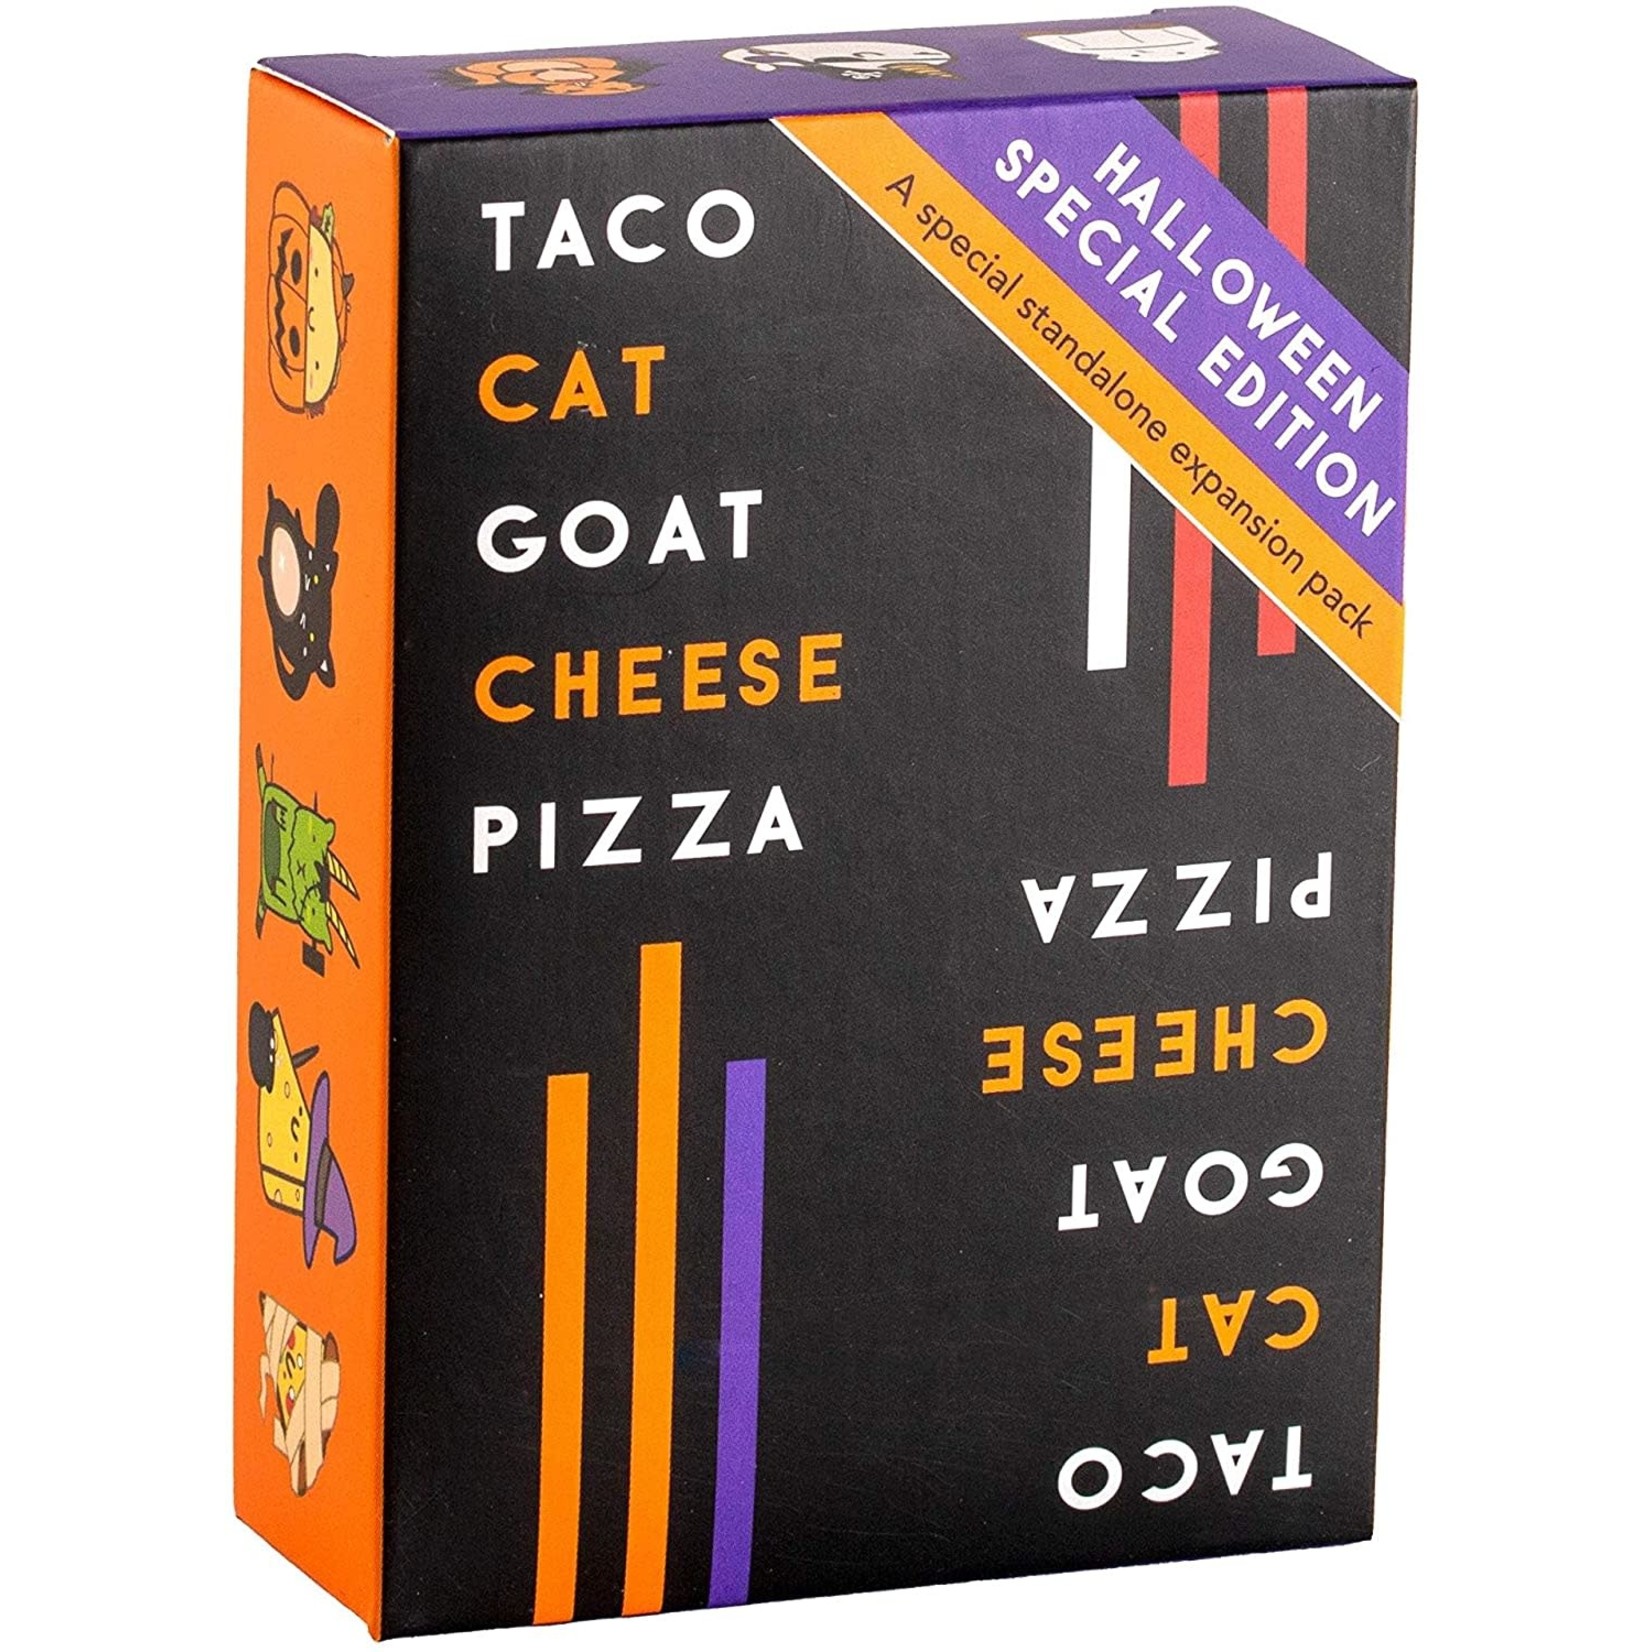 Dolphin Hat Games Taco Cat Goat Cheese Pizza Halloween